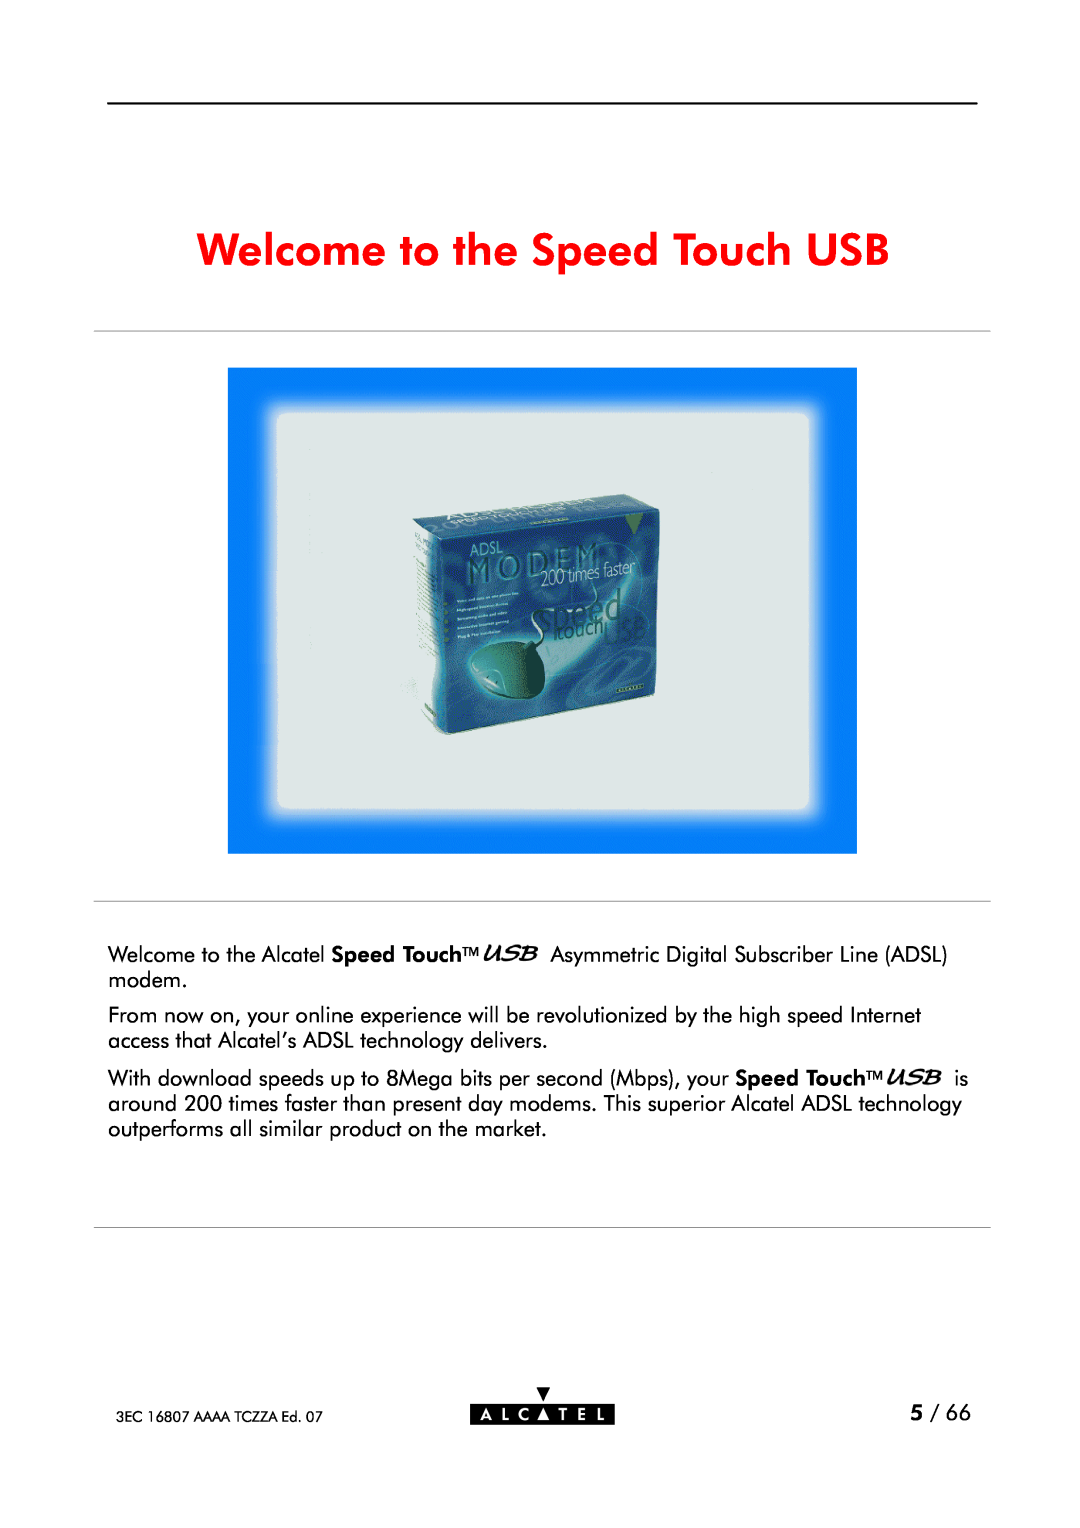 Alcatel Carrier Internetworking Solutions 3EC 16807 AAAA TCZZA ED. 07 manual Welcome to the Speed Touch USB 